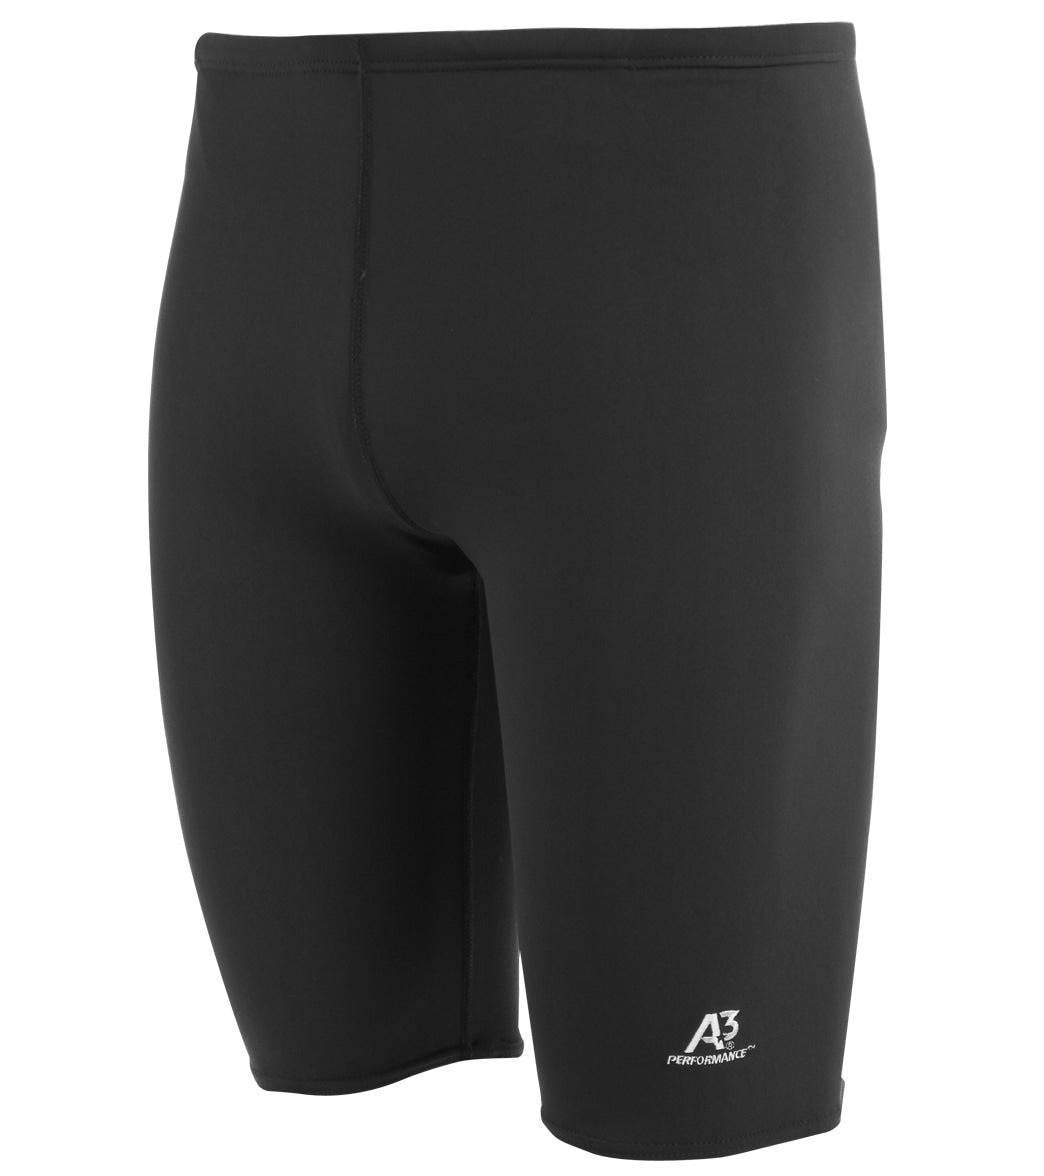 A3 Performance Poly Jammer Swimsuit - Black 38 Polyester/Pbt - Swimoutlet.com